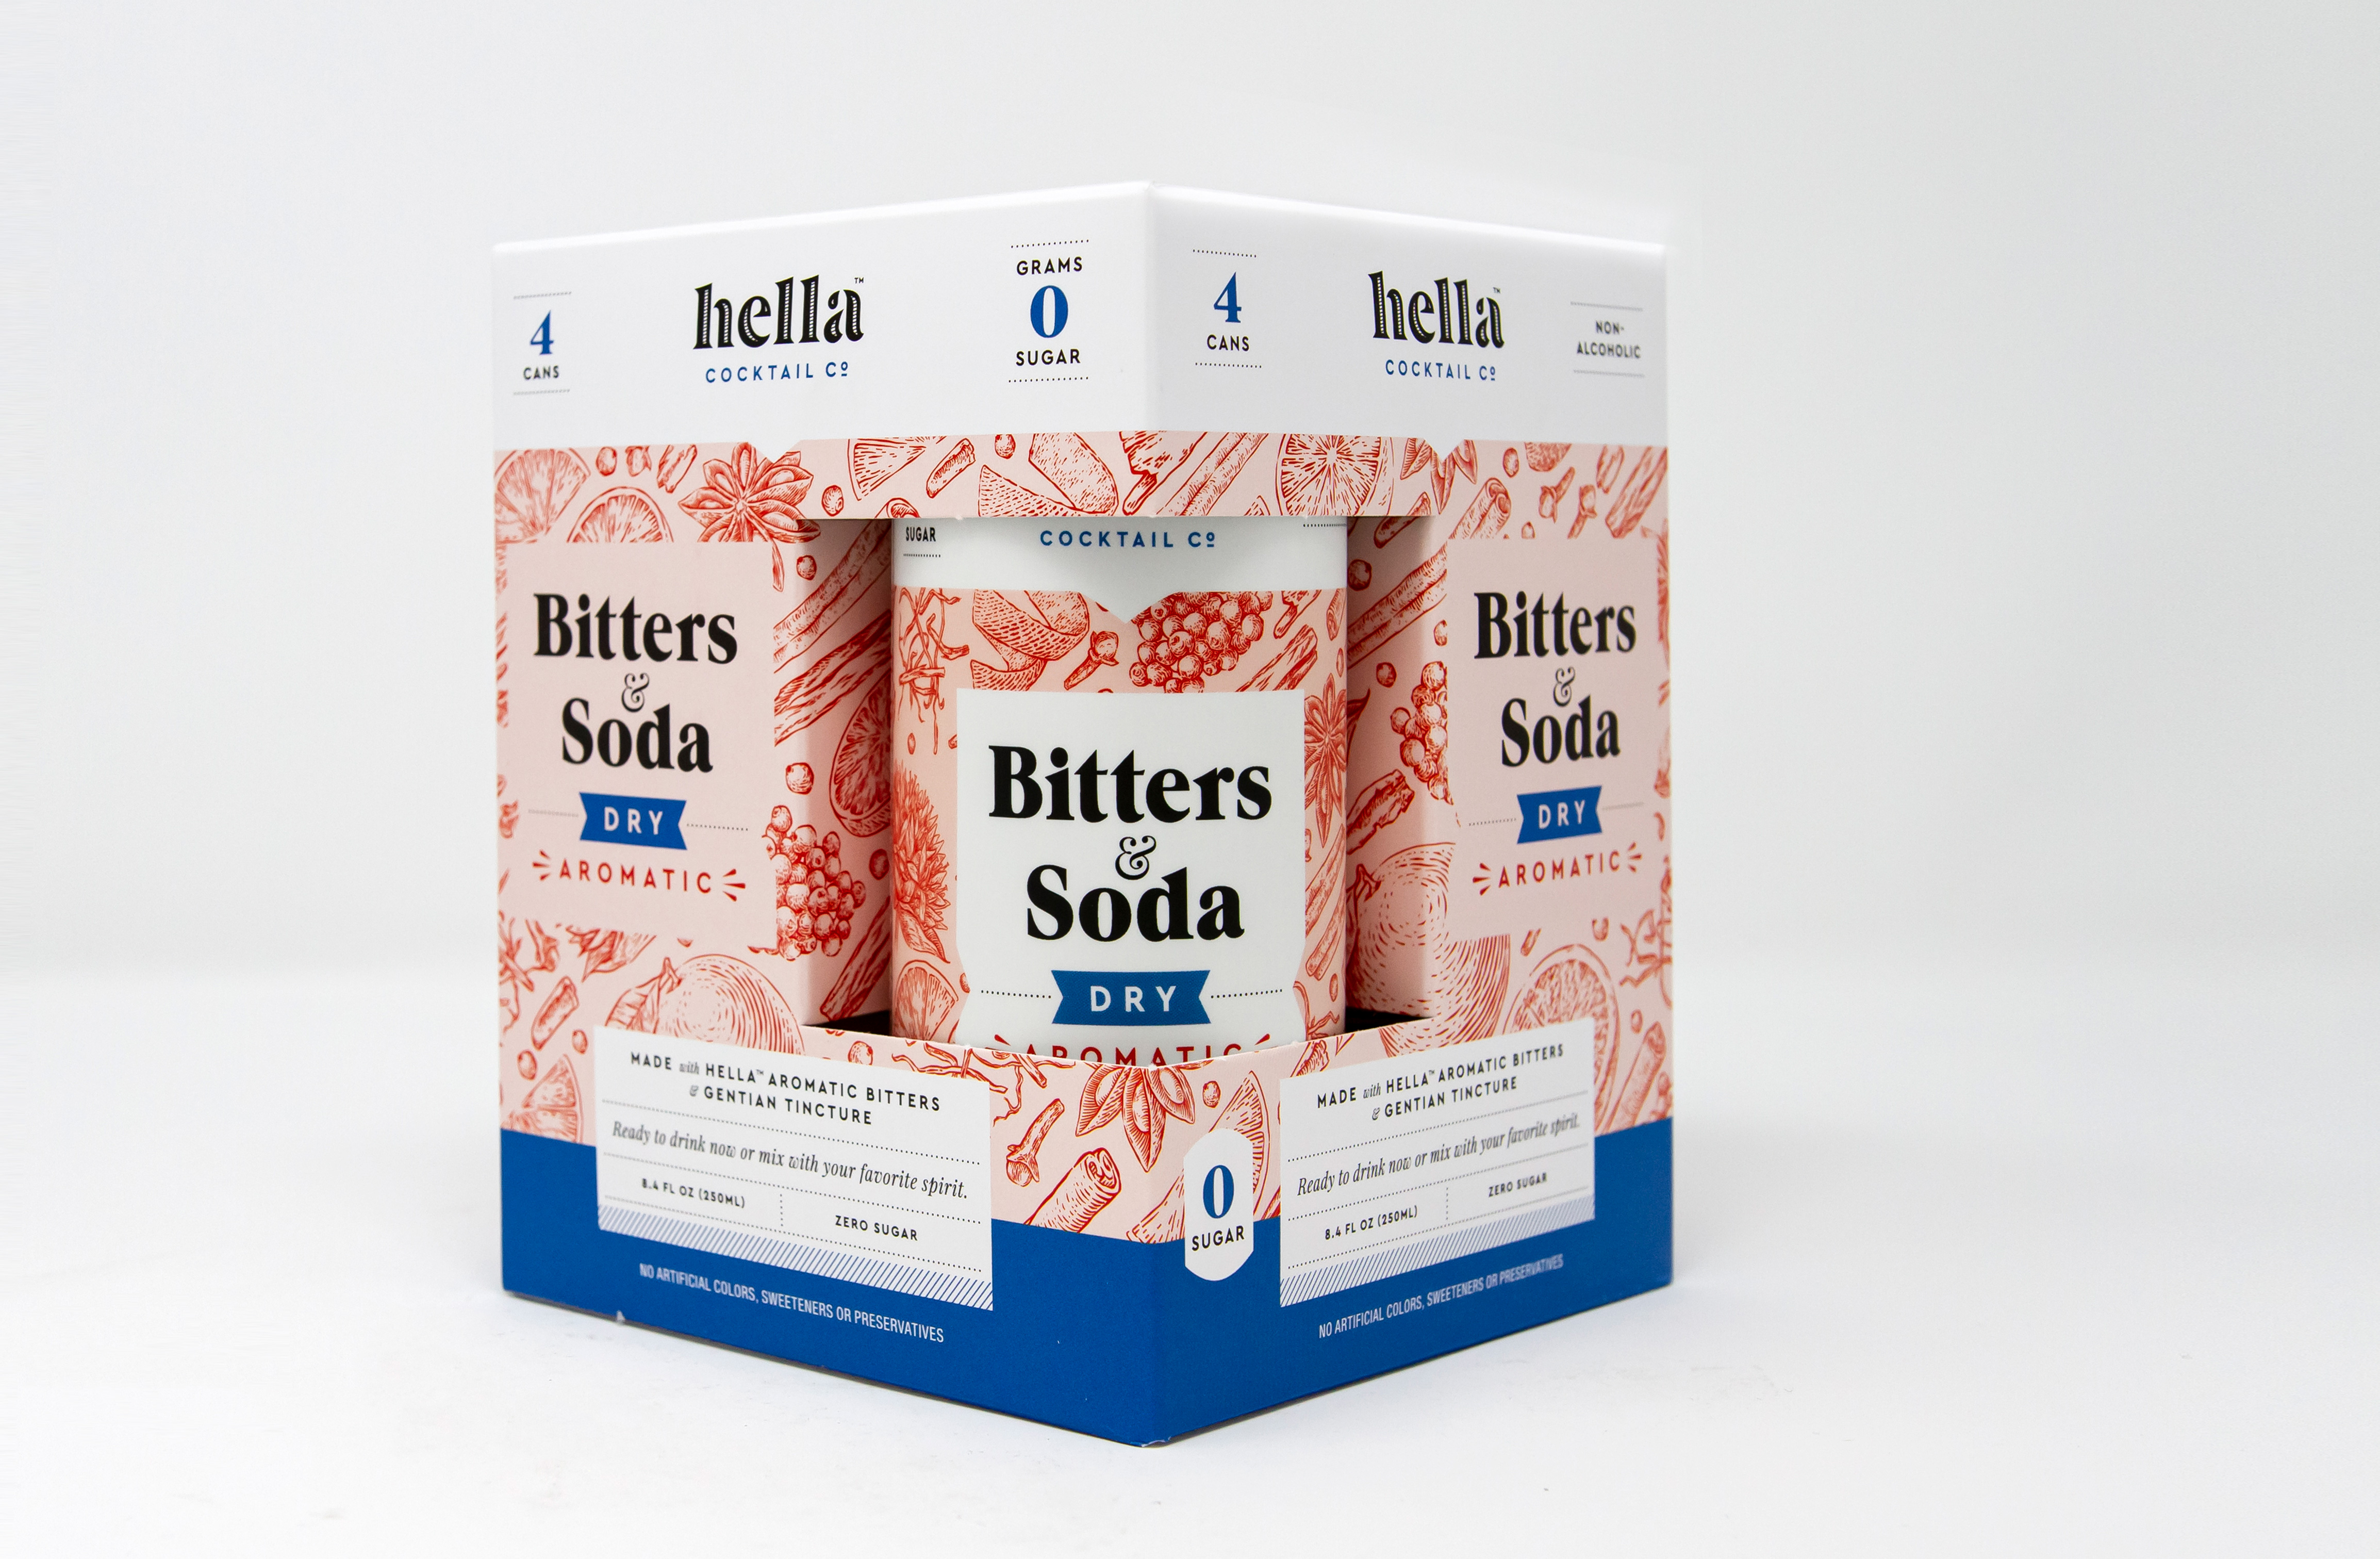 New Logo and Packaging for Hella Cocktail Co. by We Are Bill